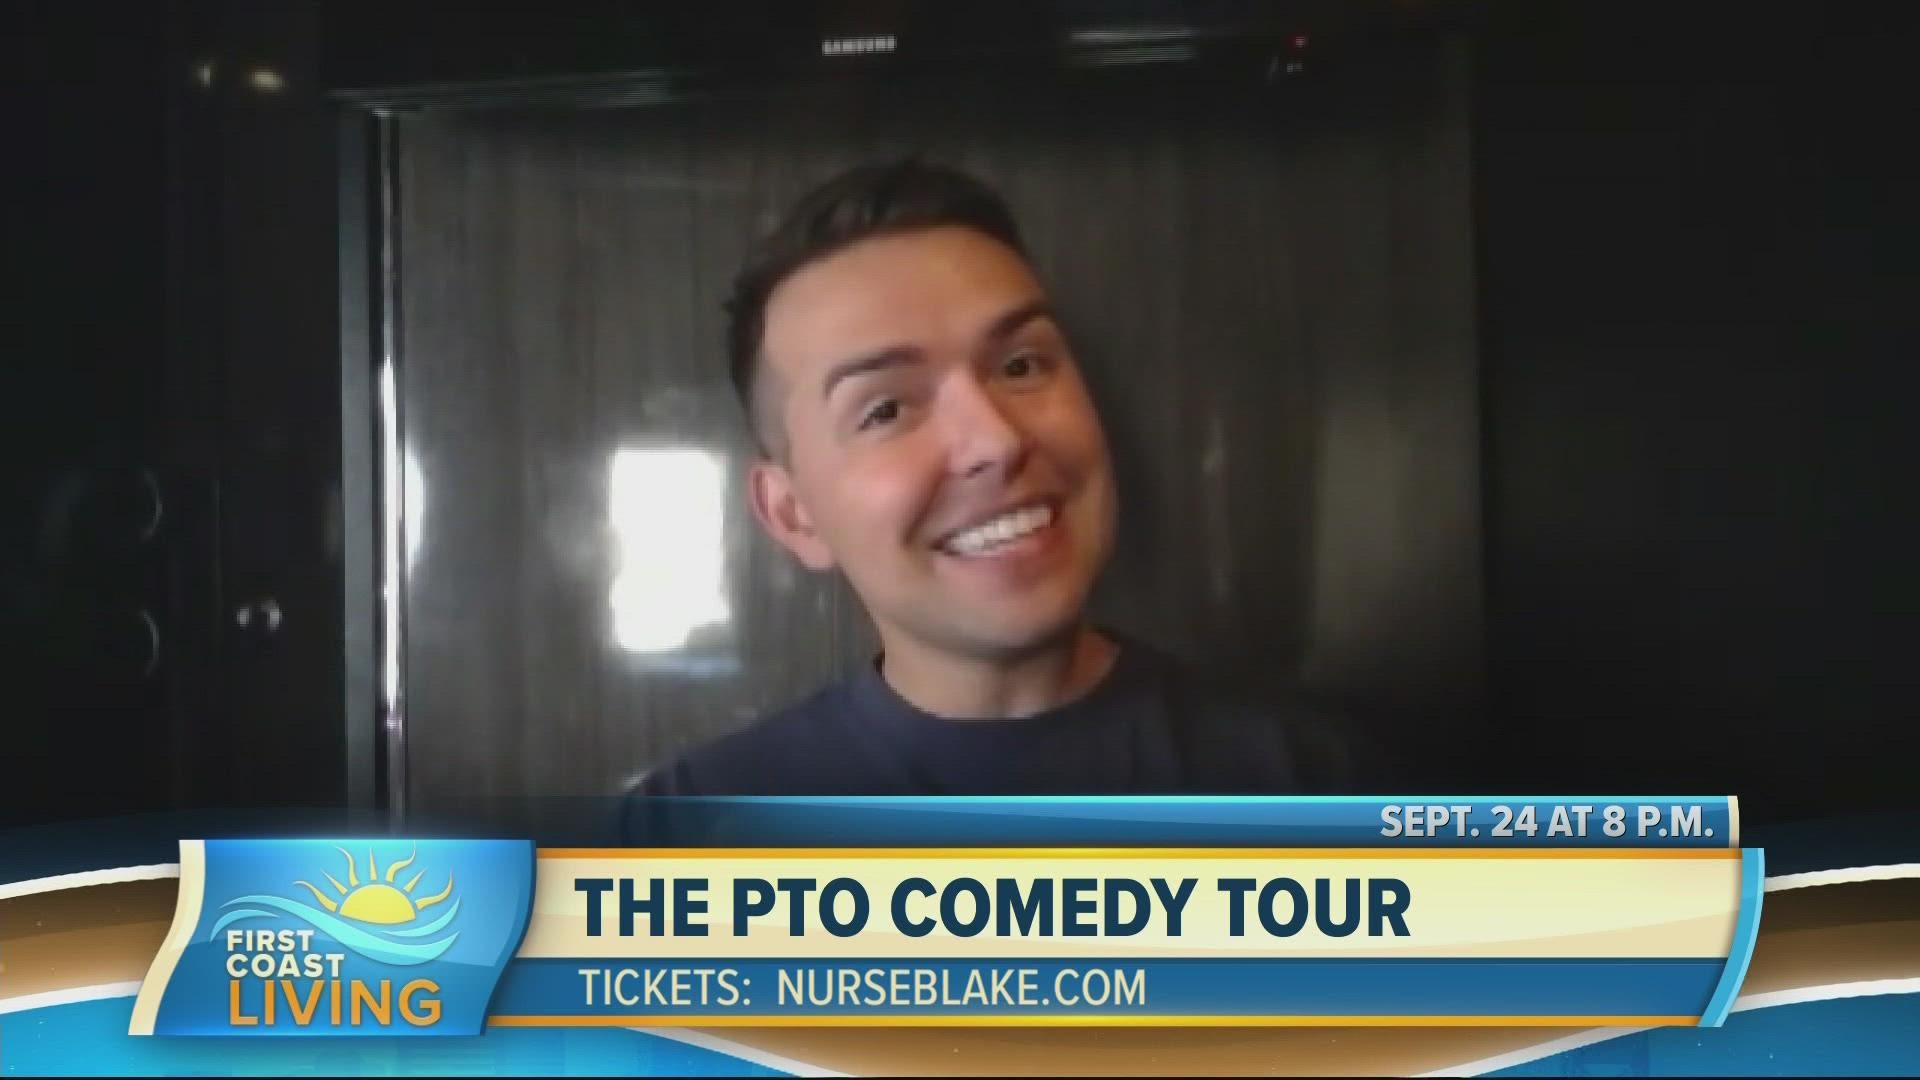 Nurse Blake: The PTO Comedy Tour will be at the Times-Union Center for the Performing Arts Sept. 24th.